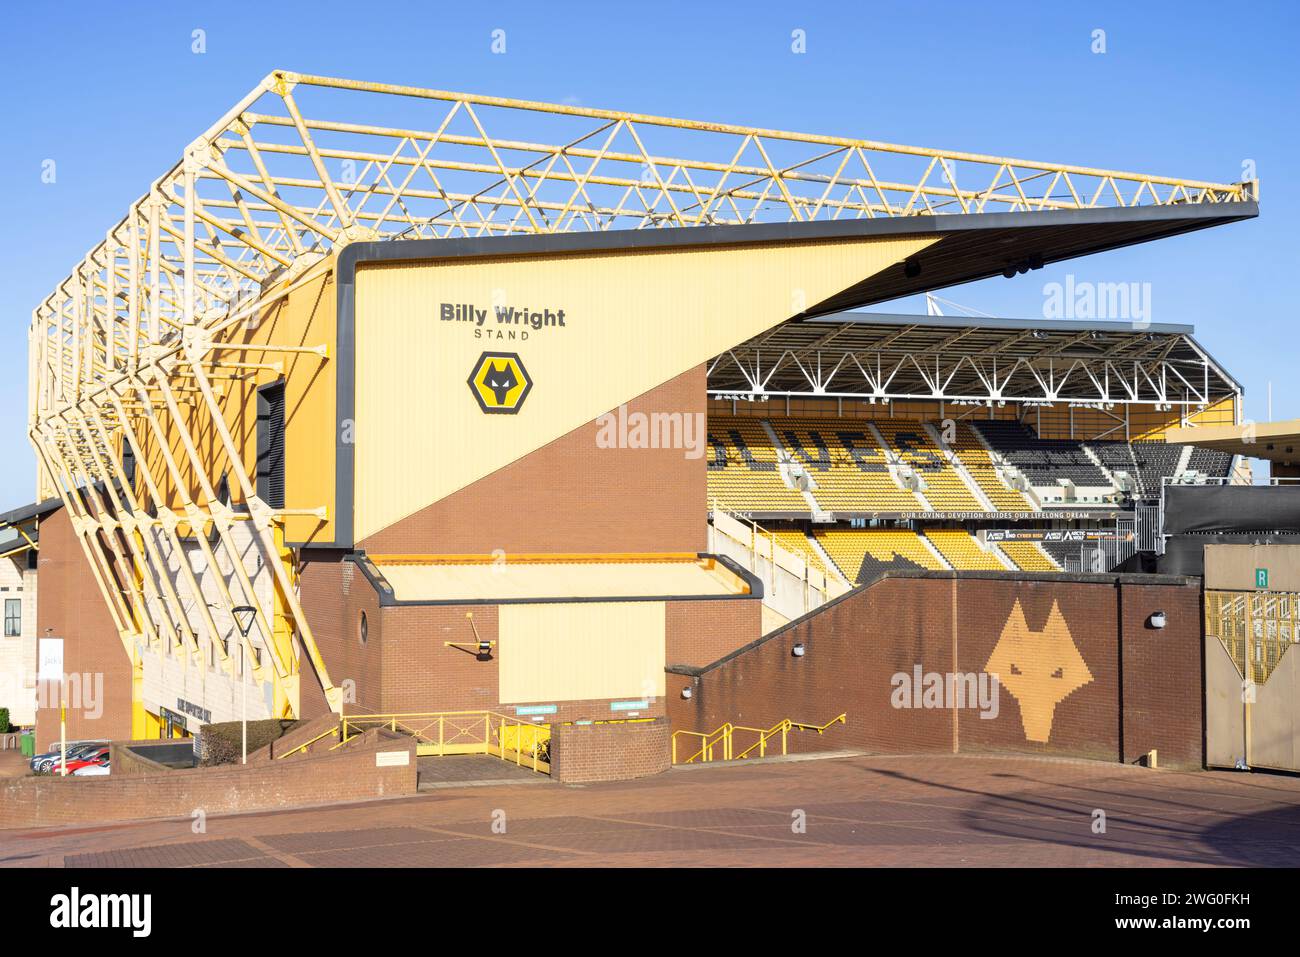 Wolverhampton Wanderers Football Club or 'Wolves' Wolverhampton Wanderers stadium in Wolverhampton West Midlands England UK GB Europe wolves fc Stock Photo